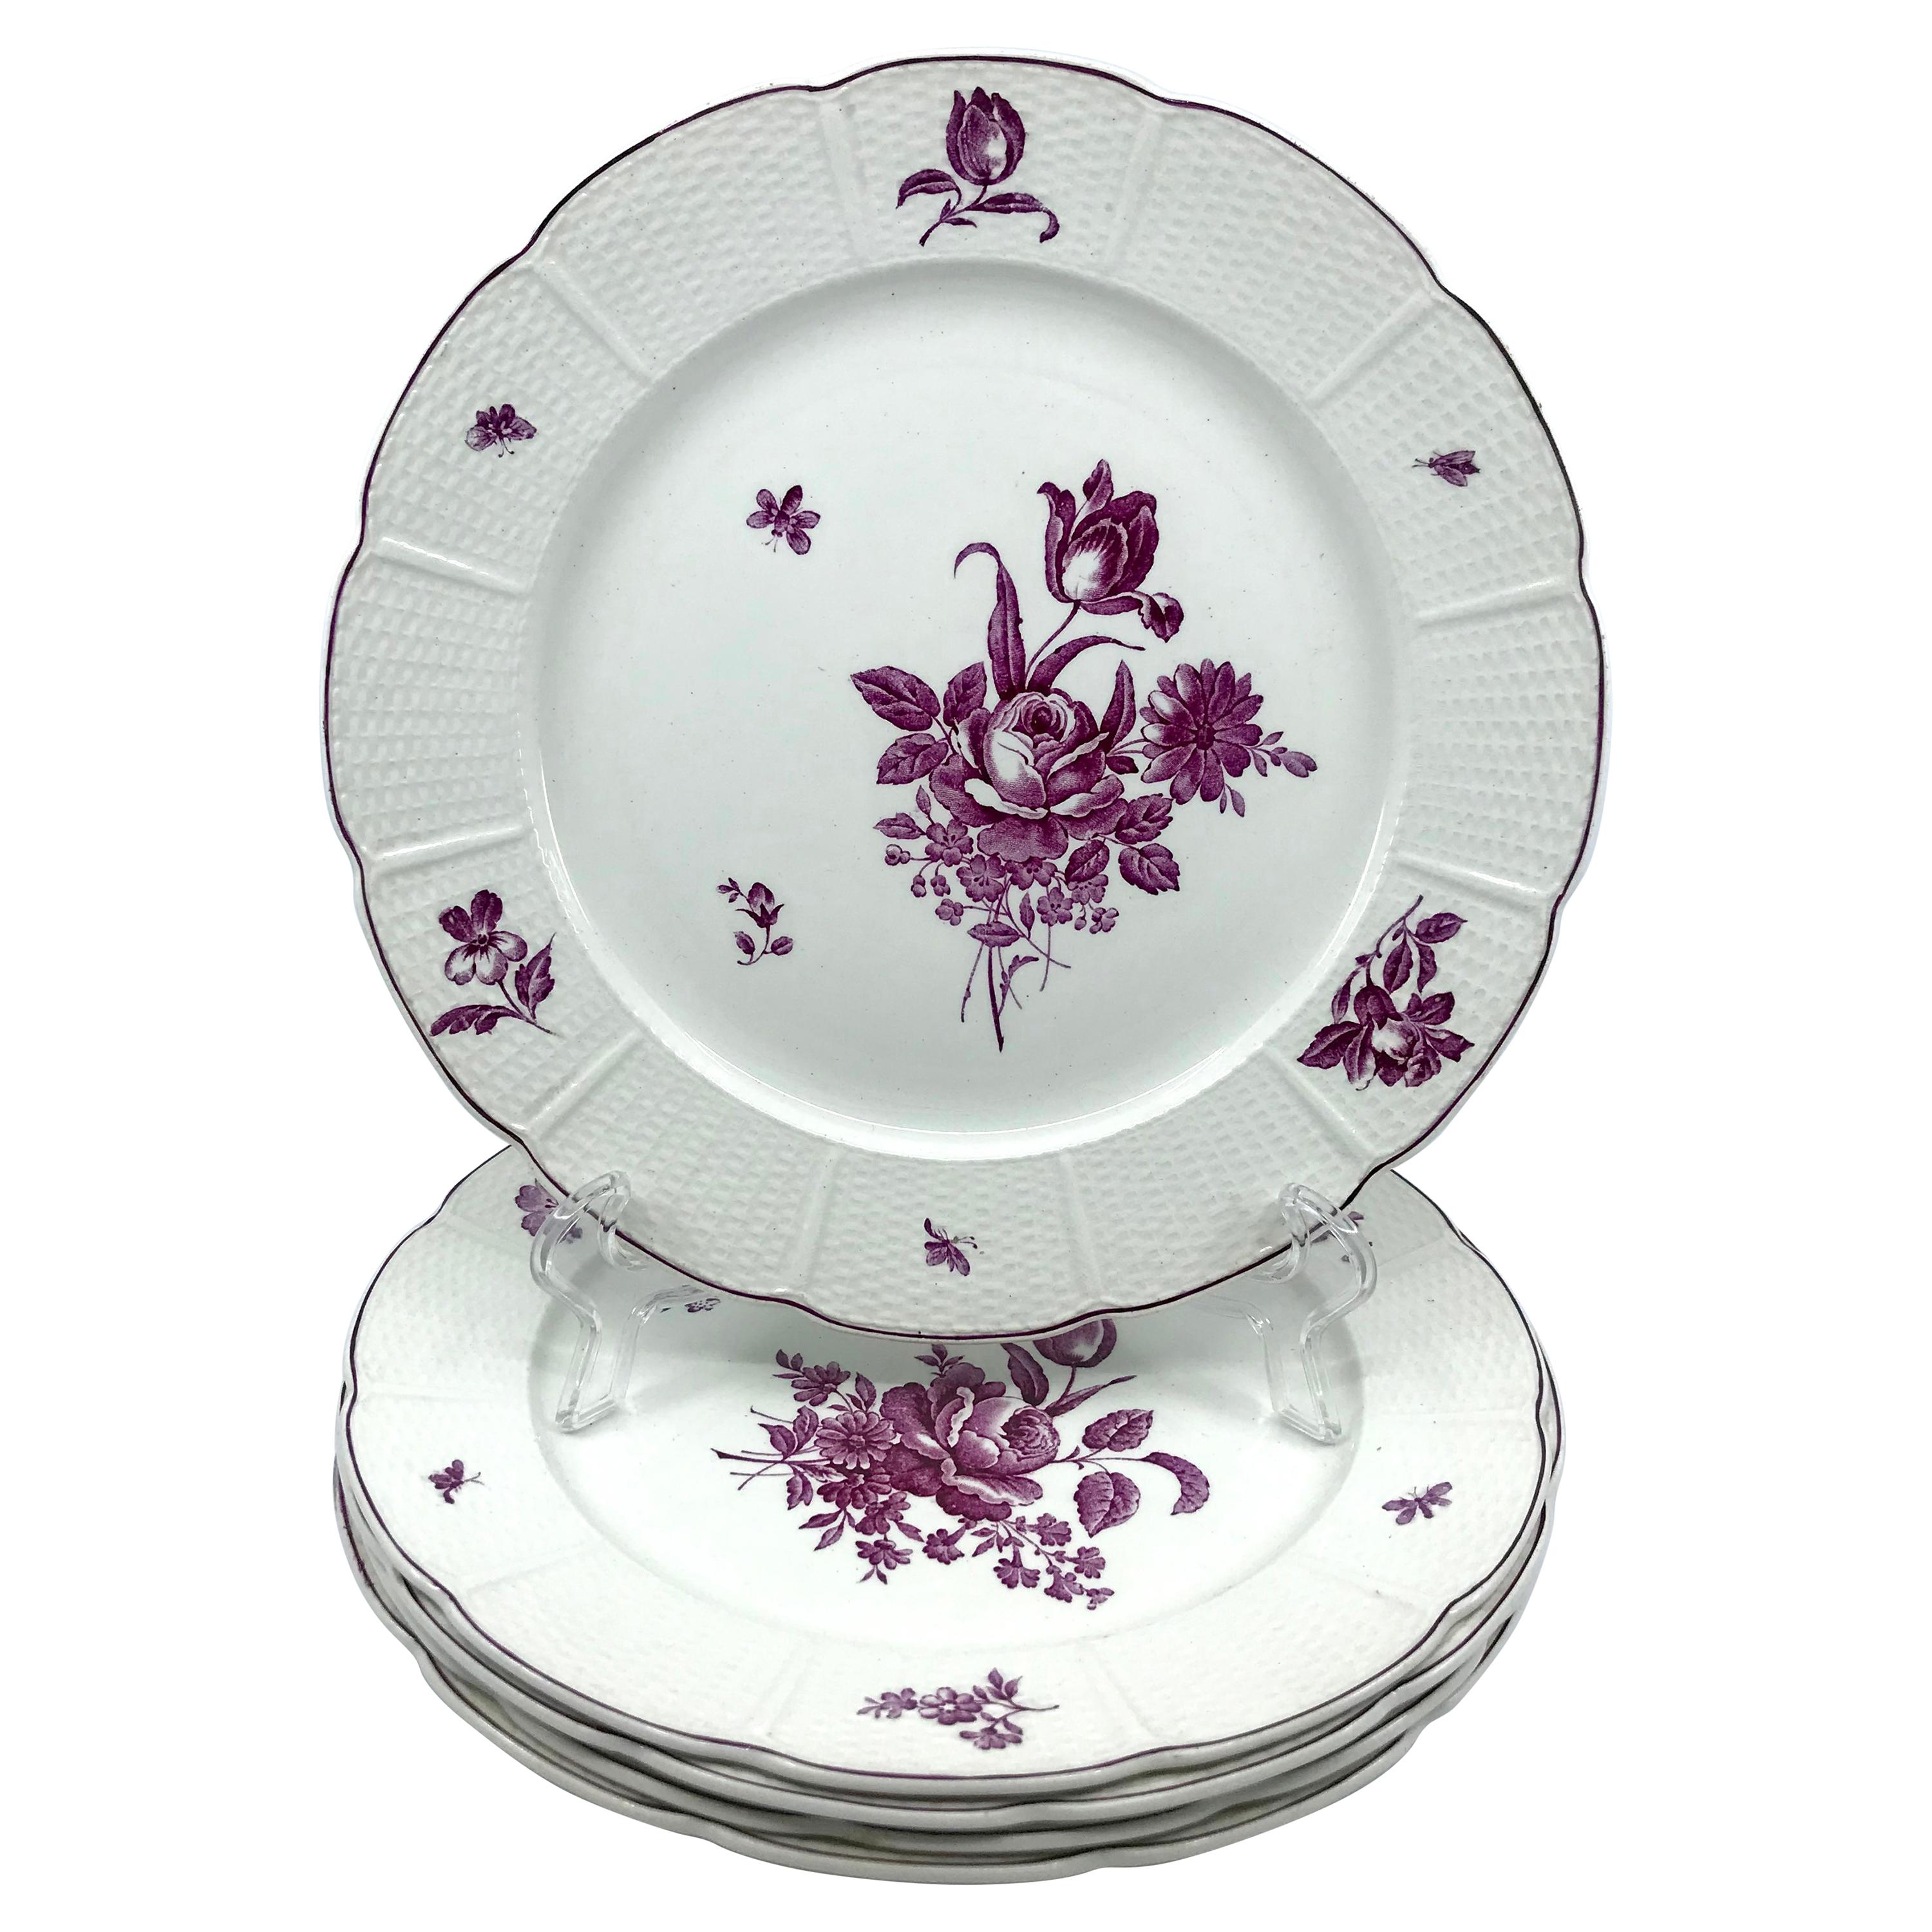 Set of Five Magenta and White Wedgwood Floral Plates